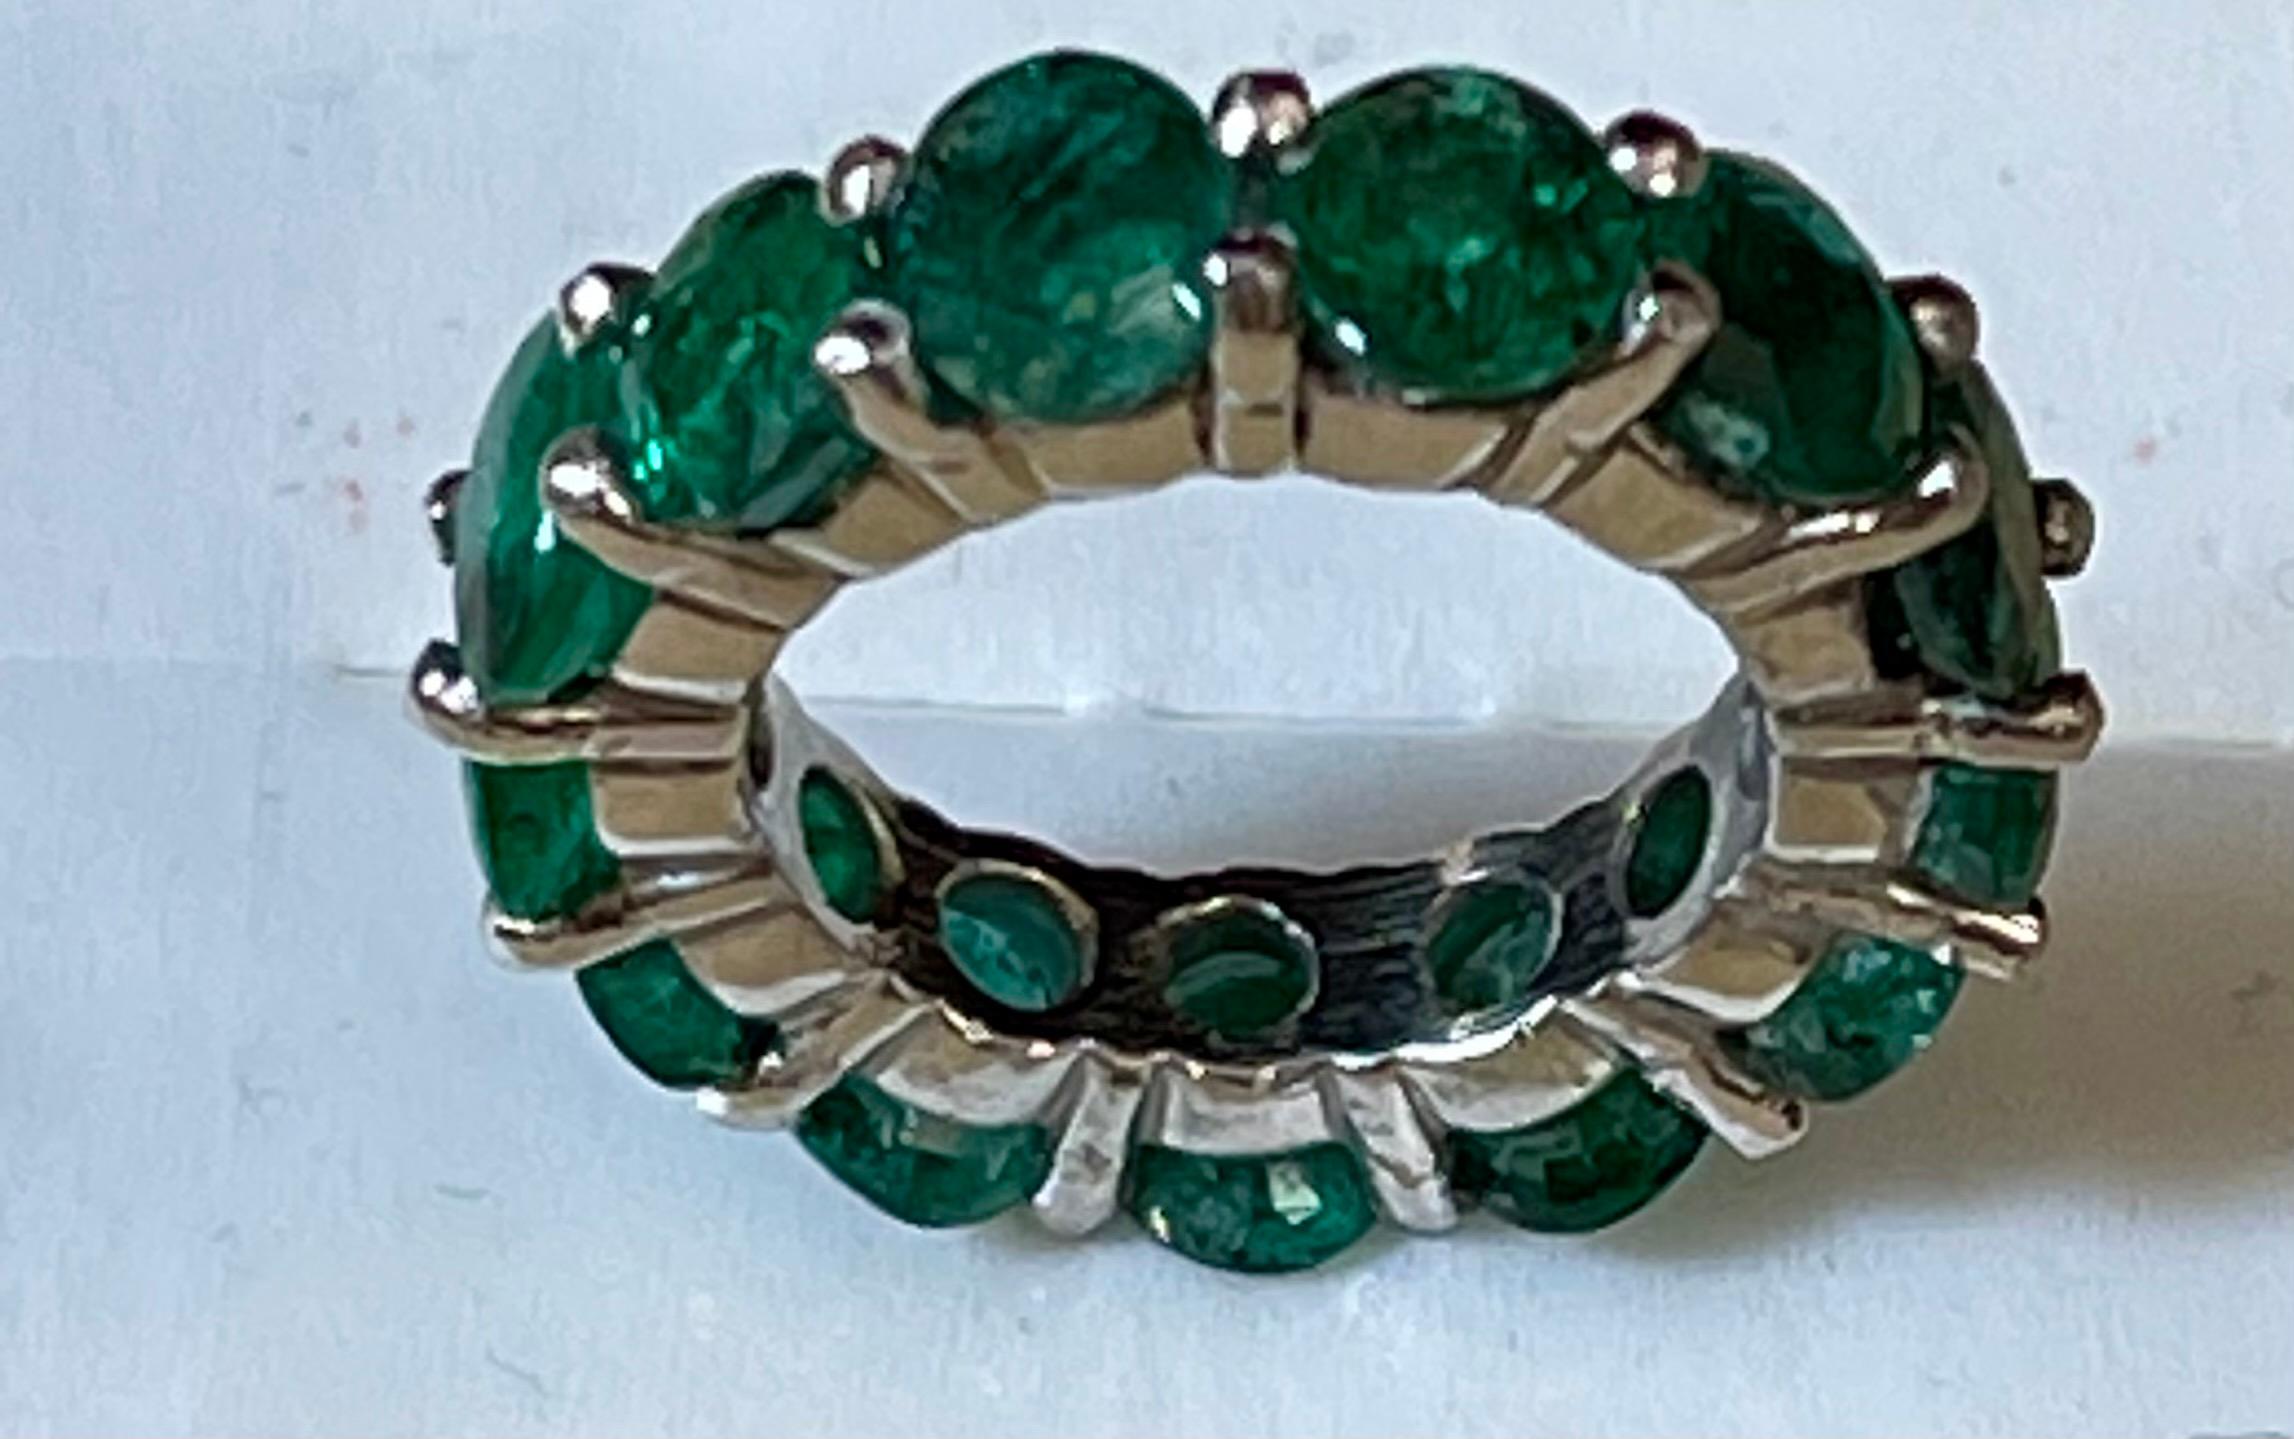 
35 Pointer Each 4.5 Carat Emerald Anniversary Eternity Band / Ring in Platinum
Full prong set Emerald  eternity ring set all around with matching 100% natural Emeralds  in hand-polished made in platinum
6 mm Wide band 
This eternity band features